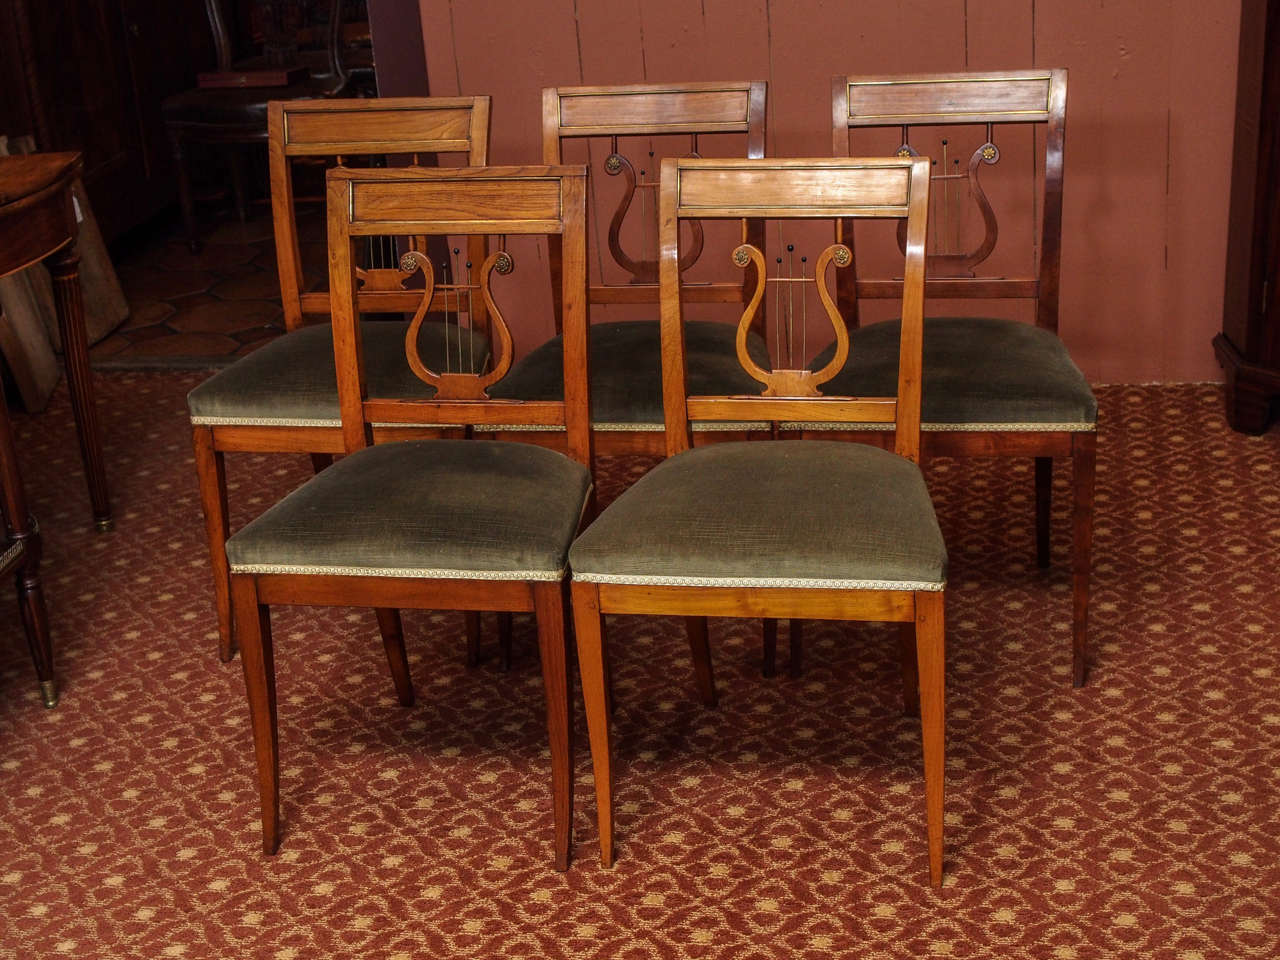 Set of ten 19th century French Directoire style dining chairs with sabre legs and lyre decoration at back, accented with bronze rosettes